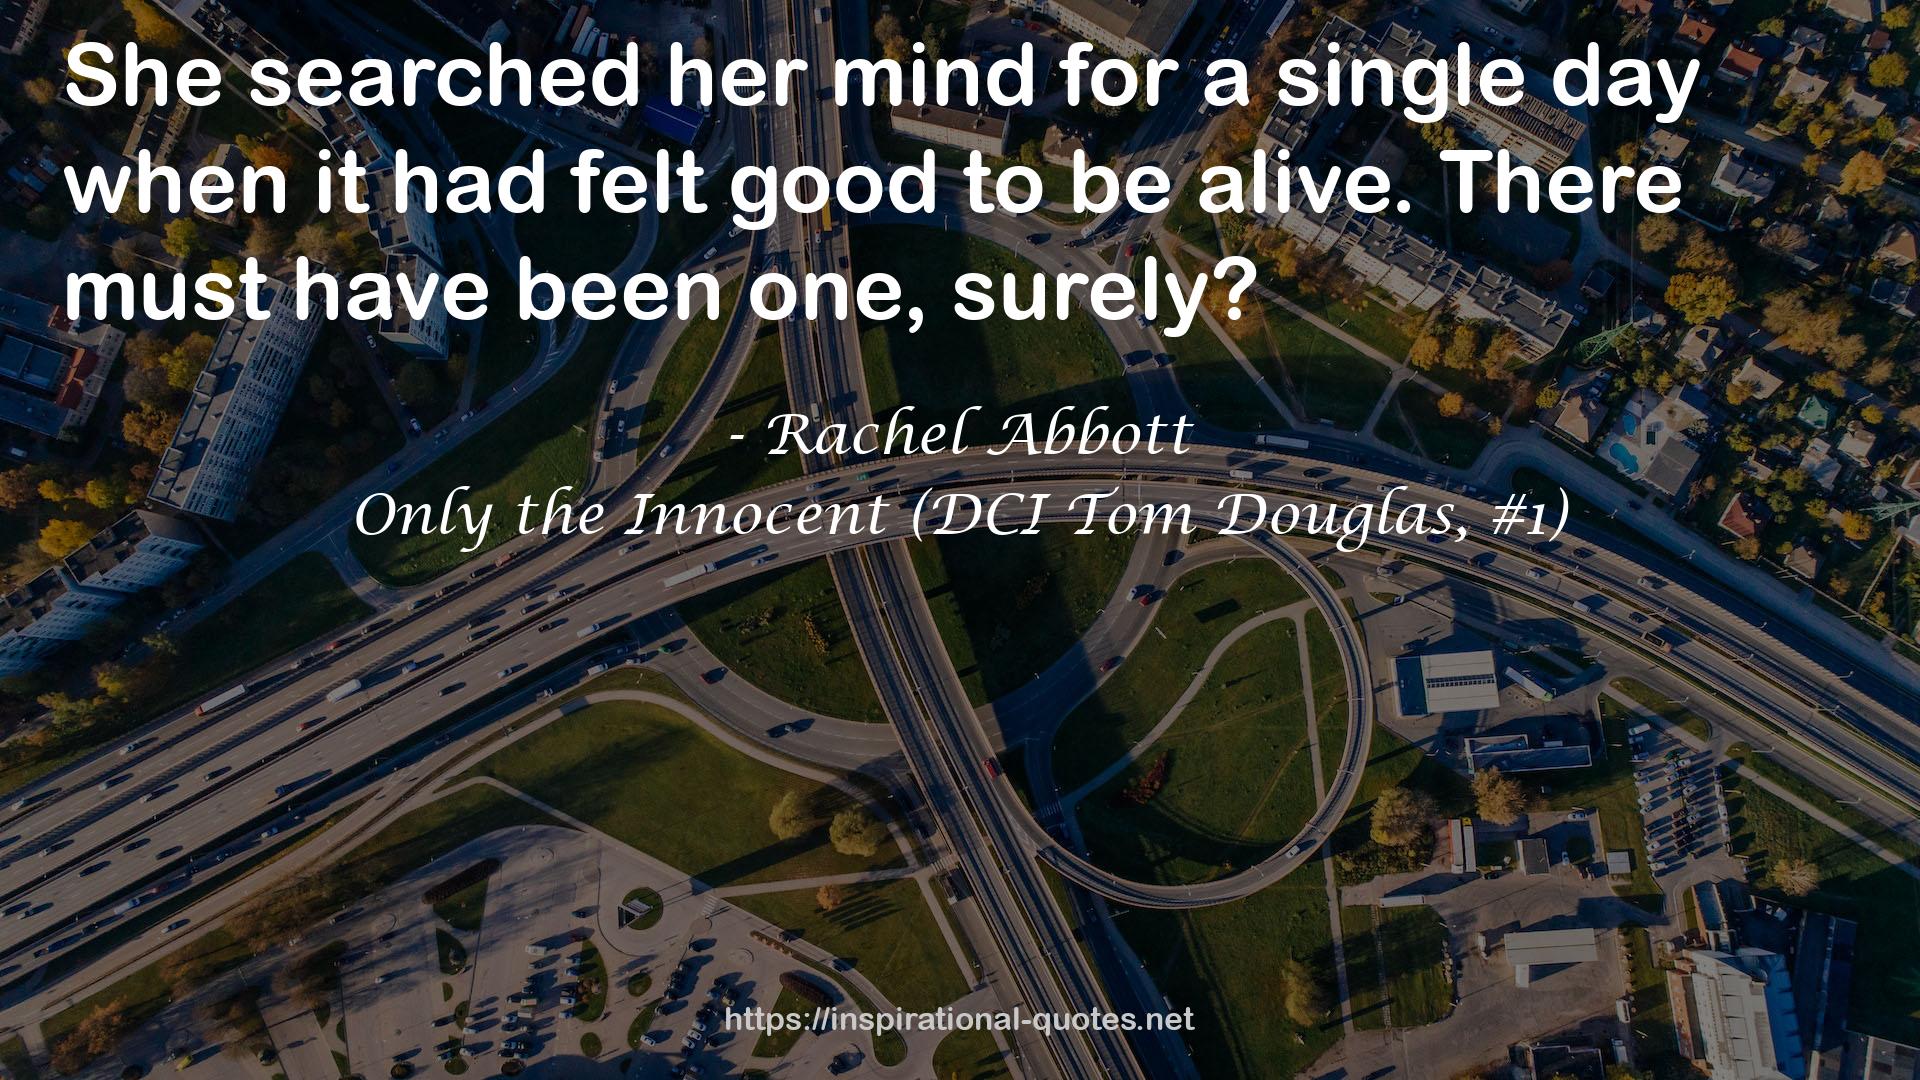 Only the Innocent (DCI Tom Douglas, #1) QUOTES